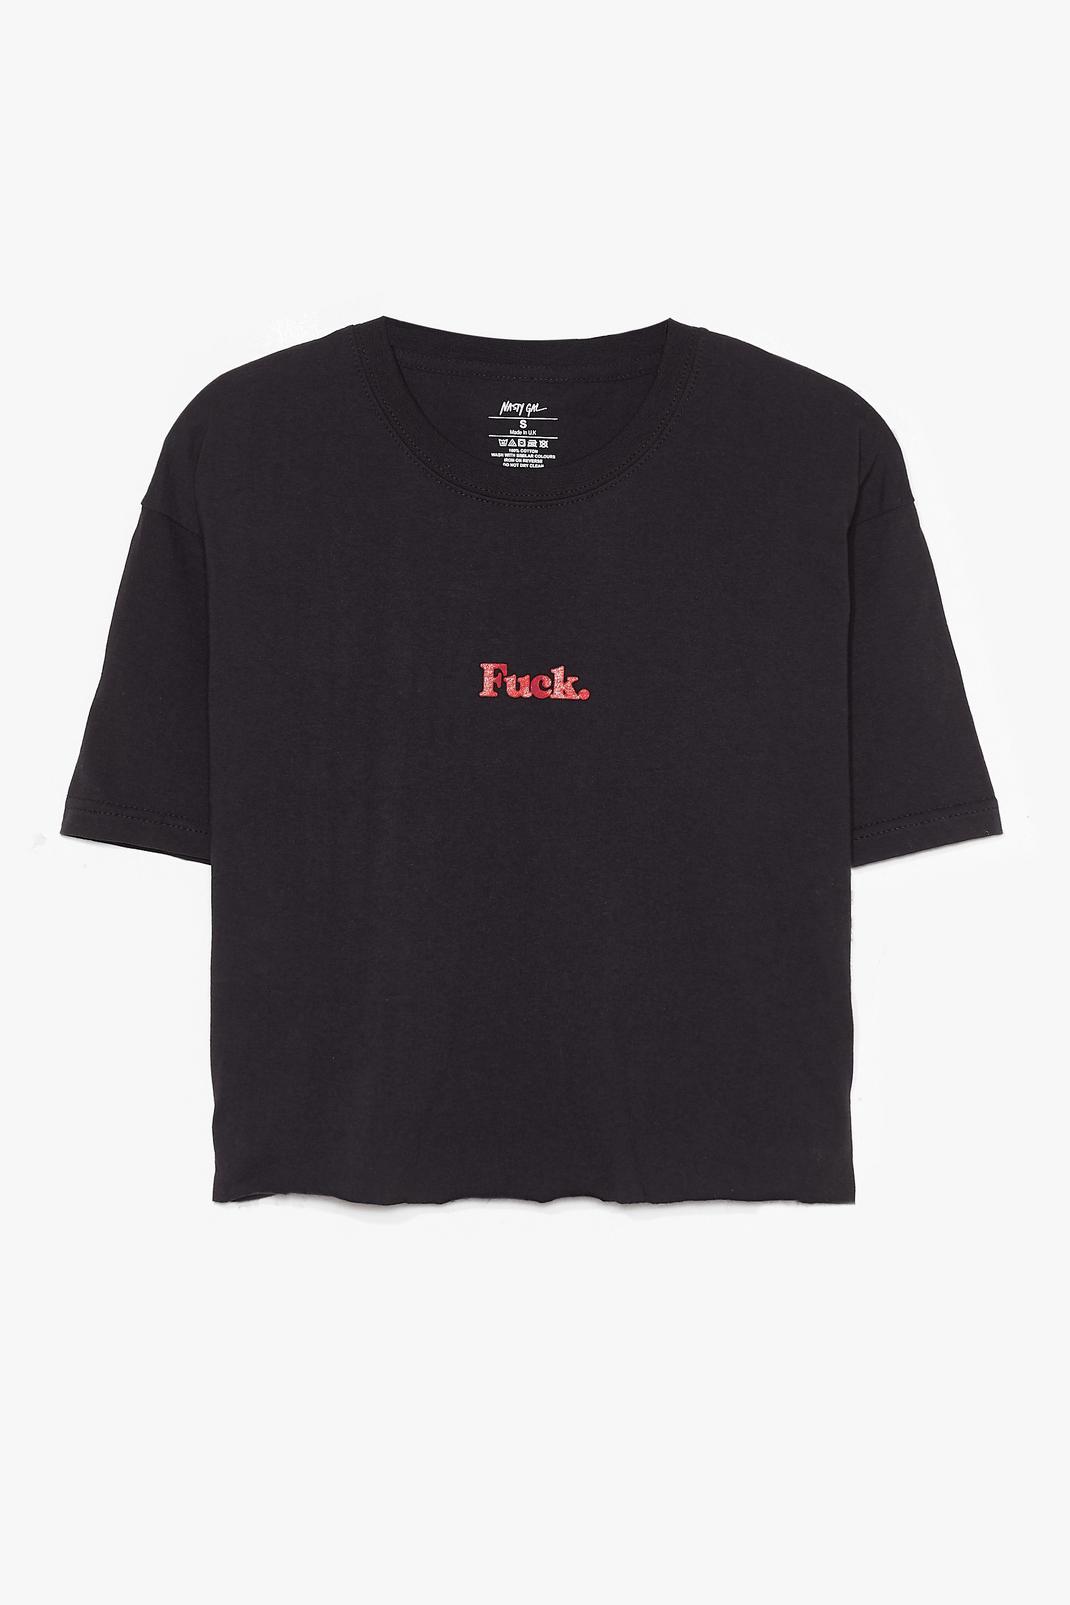 Fuck Graphic Crop T-Shirt image number 1